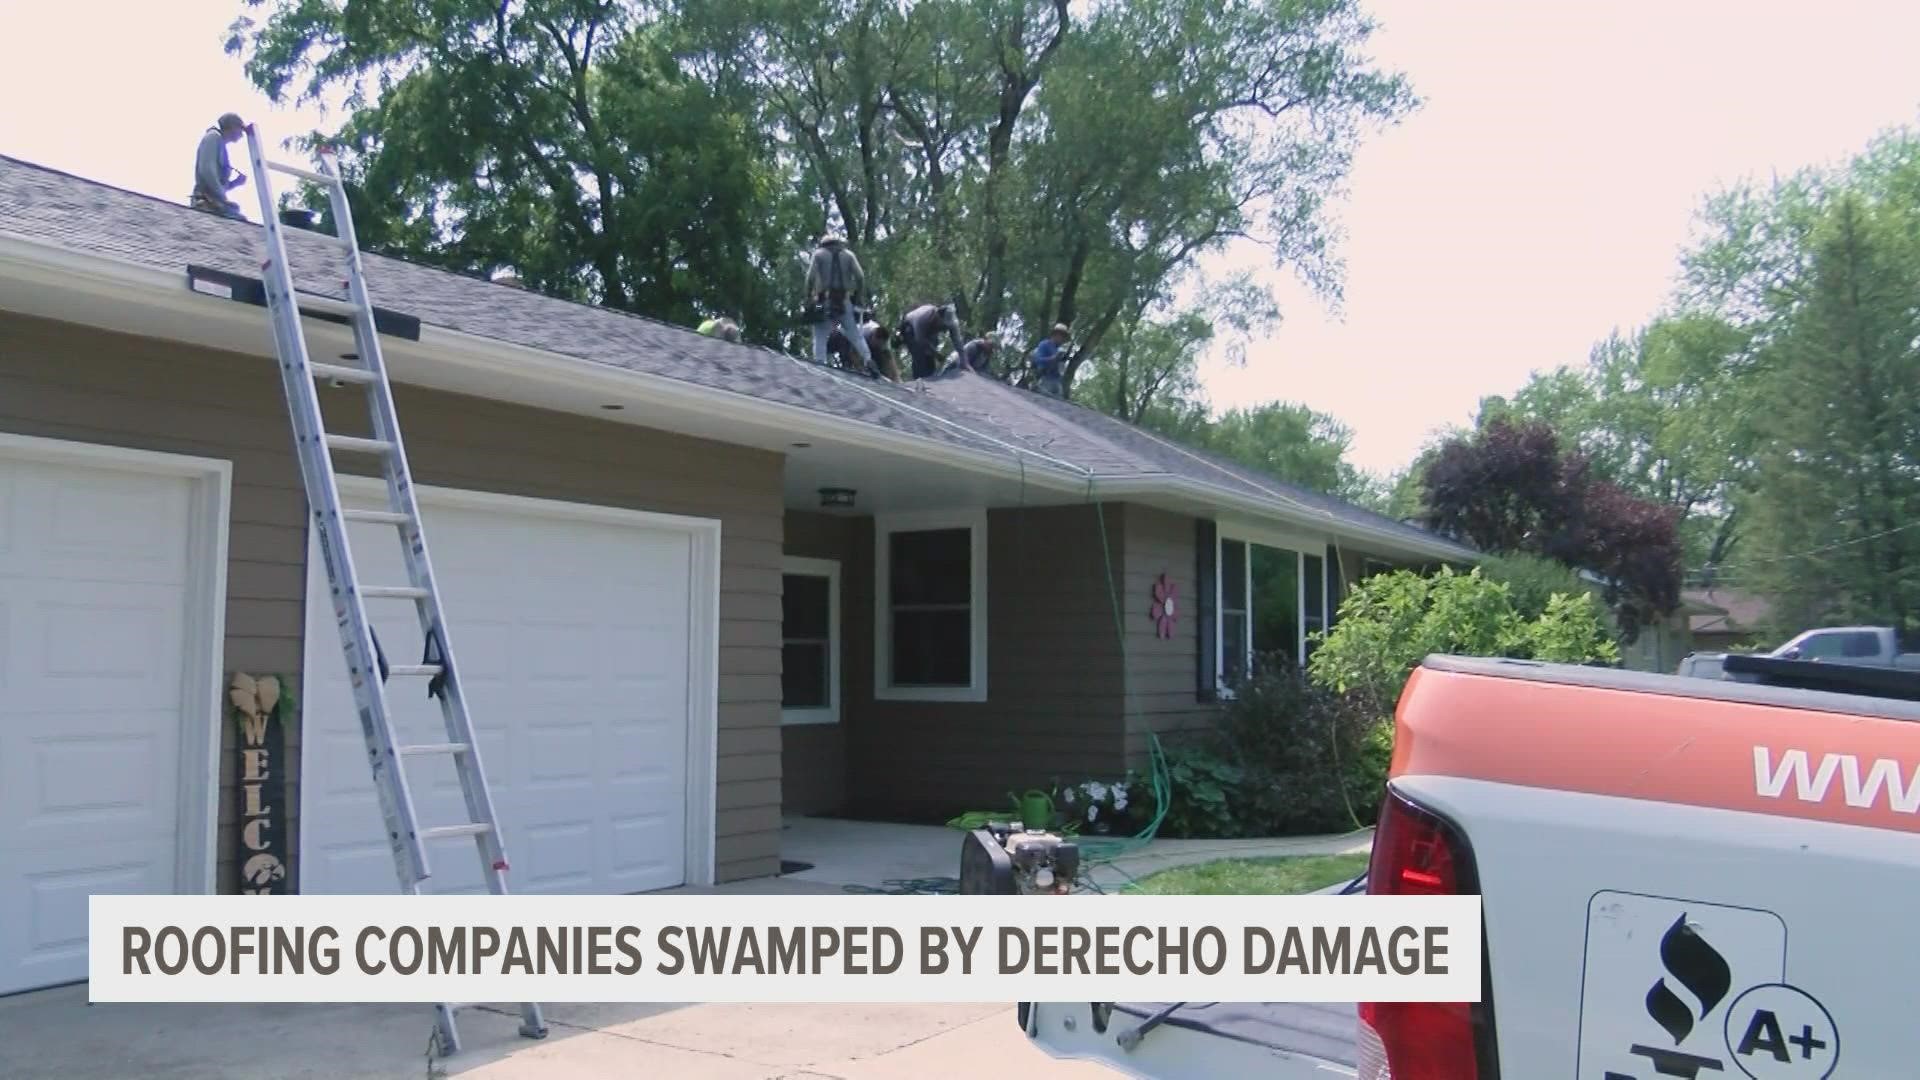 Roofing companies reflect on being swamped after the destruction the derecho left behind, and how some homeowners are just starting to notice their derecho damage.